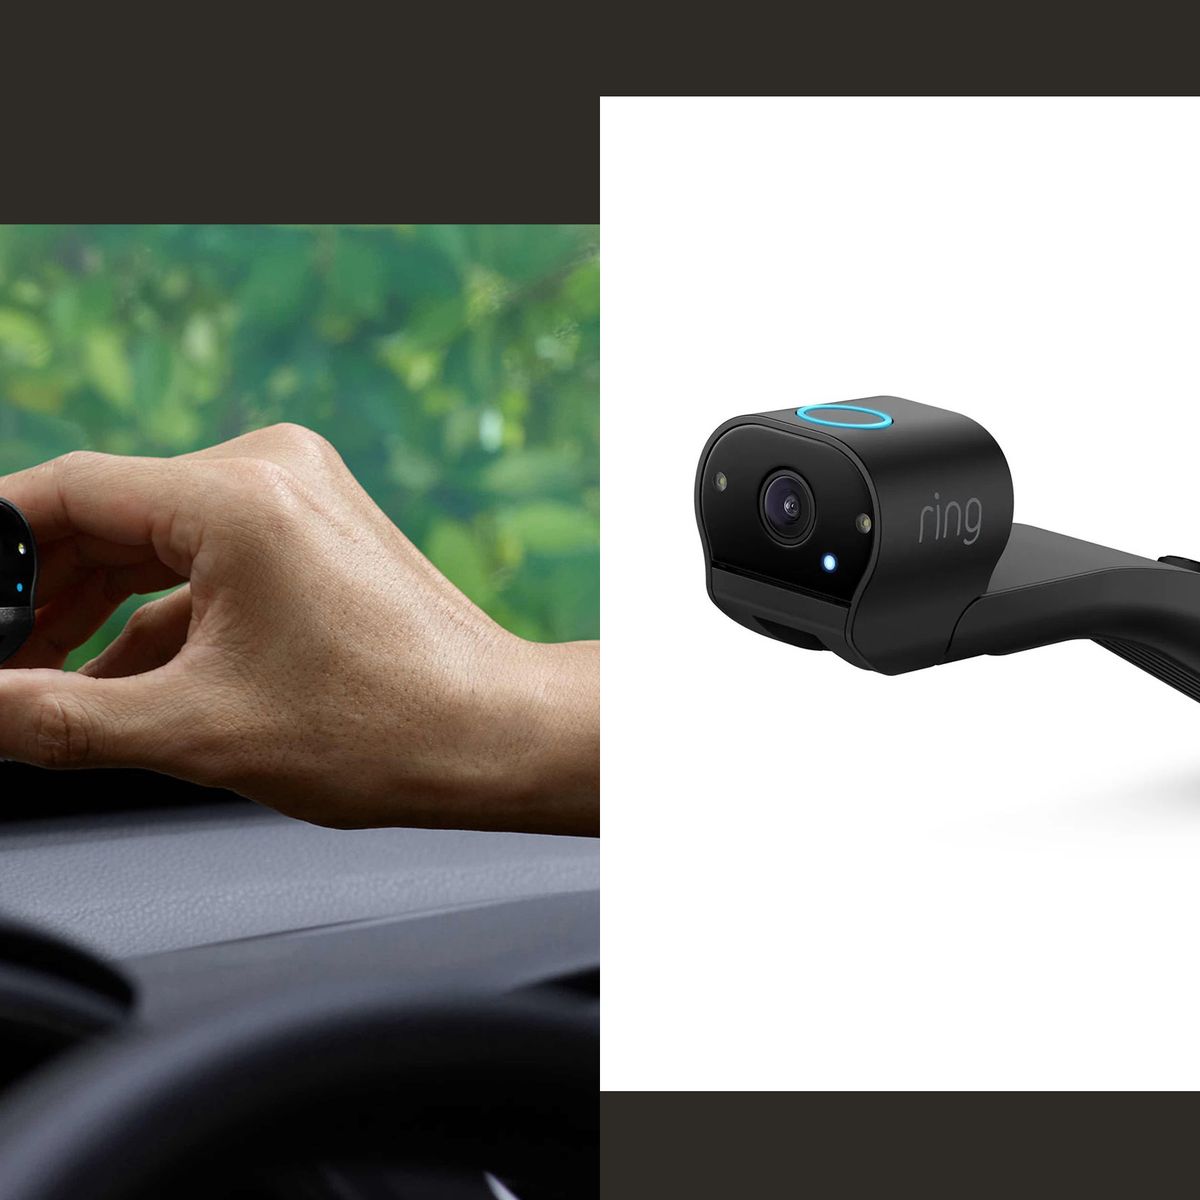 s Ring Car Cam Is Finally Here! Get Yours Today